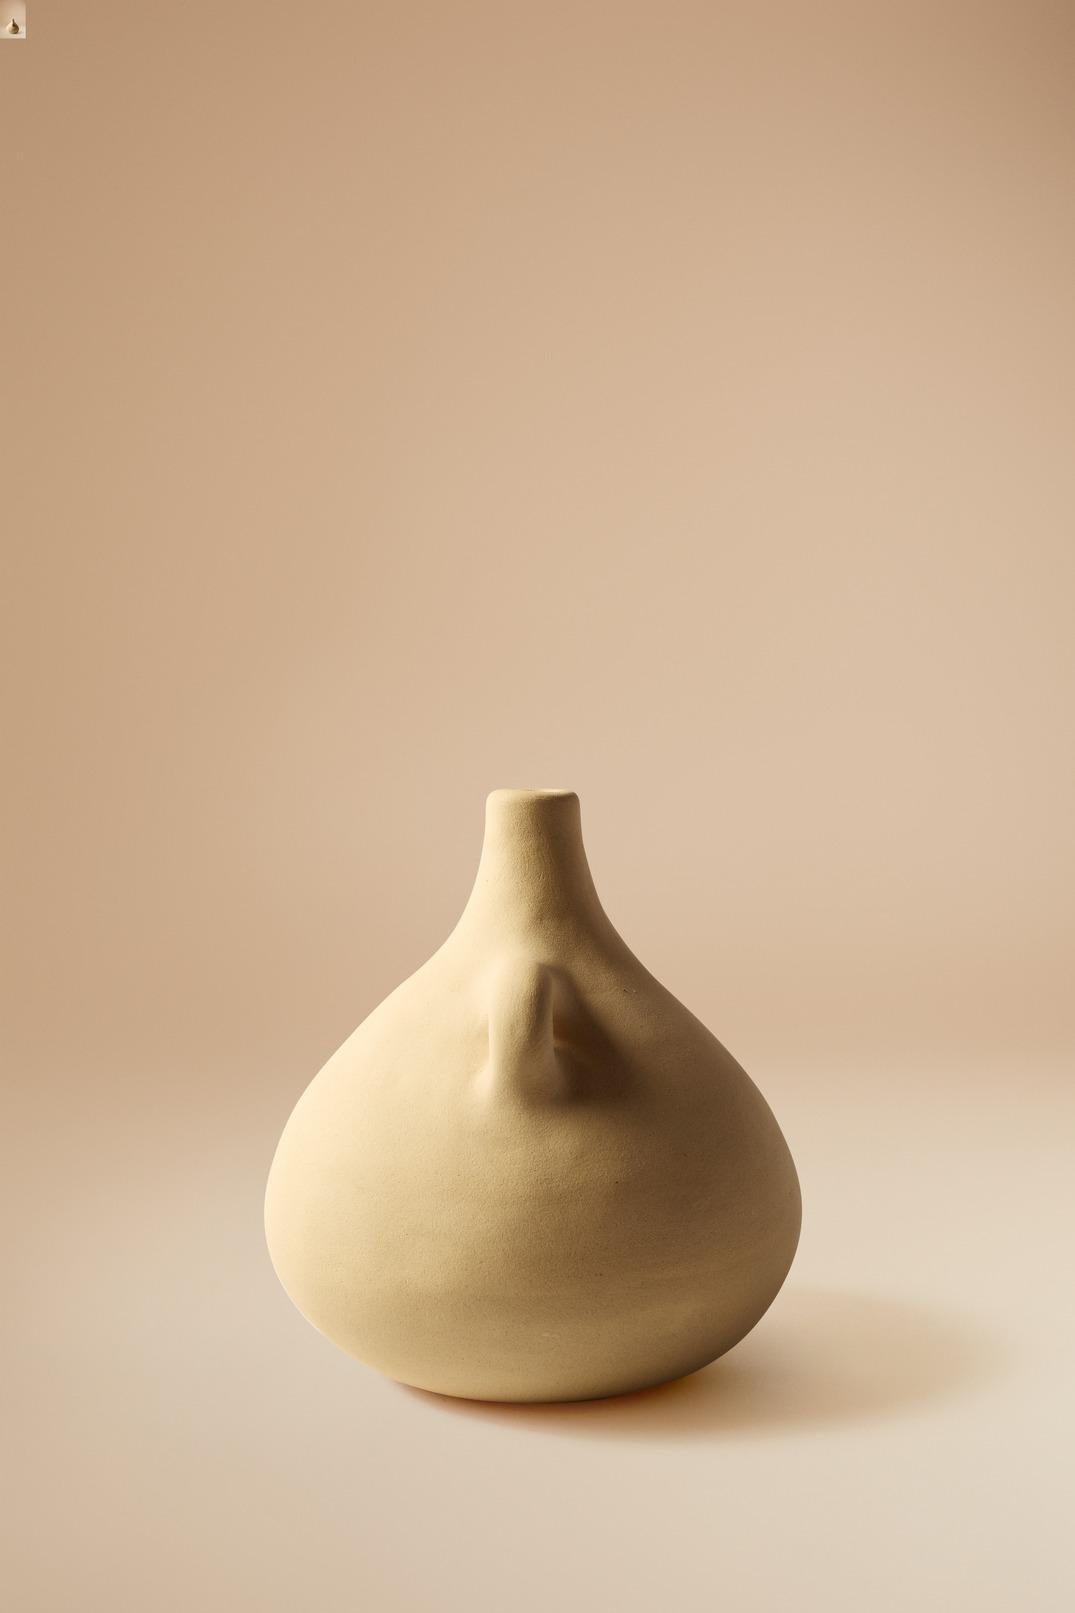 Modern Vessel 01 in Natural Smooth Clay. Handmade by Jade Paton for Lemon For Sale